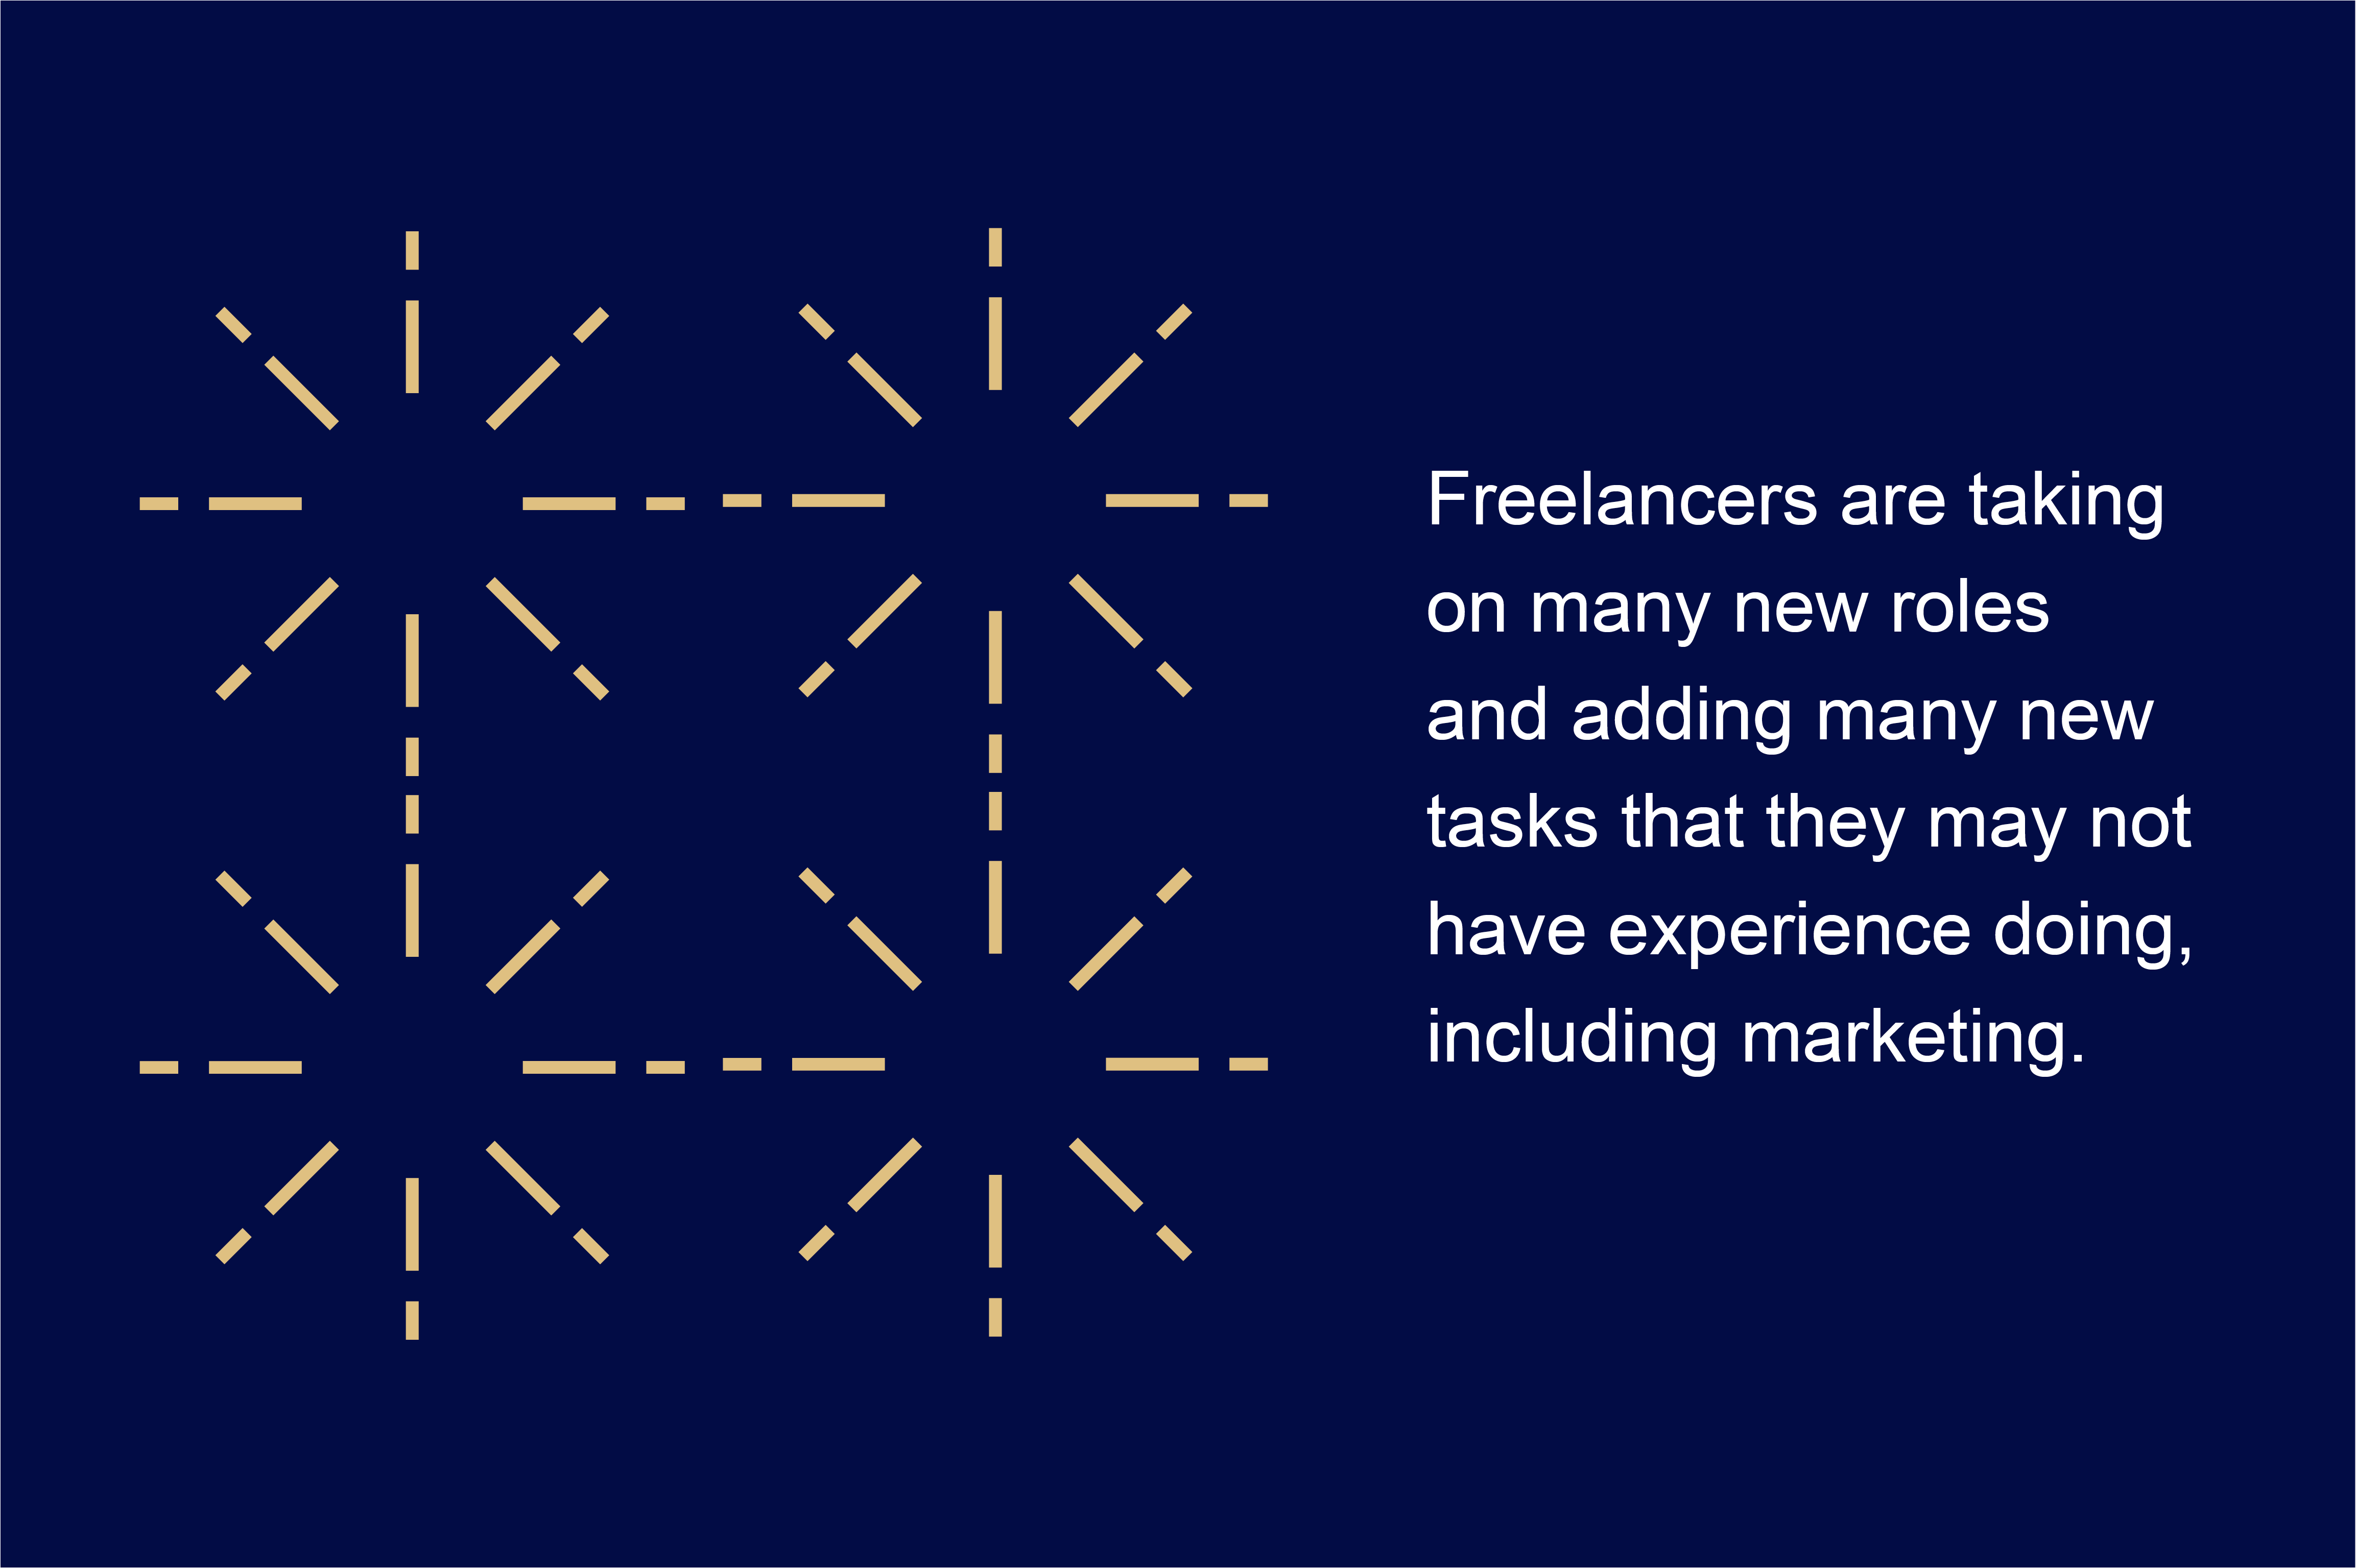 Freelancer are taking on many new roles and adding many new tasks that they may not have experience doing, including marketing.